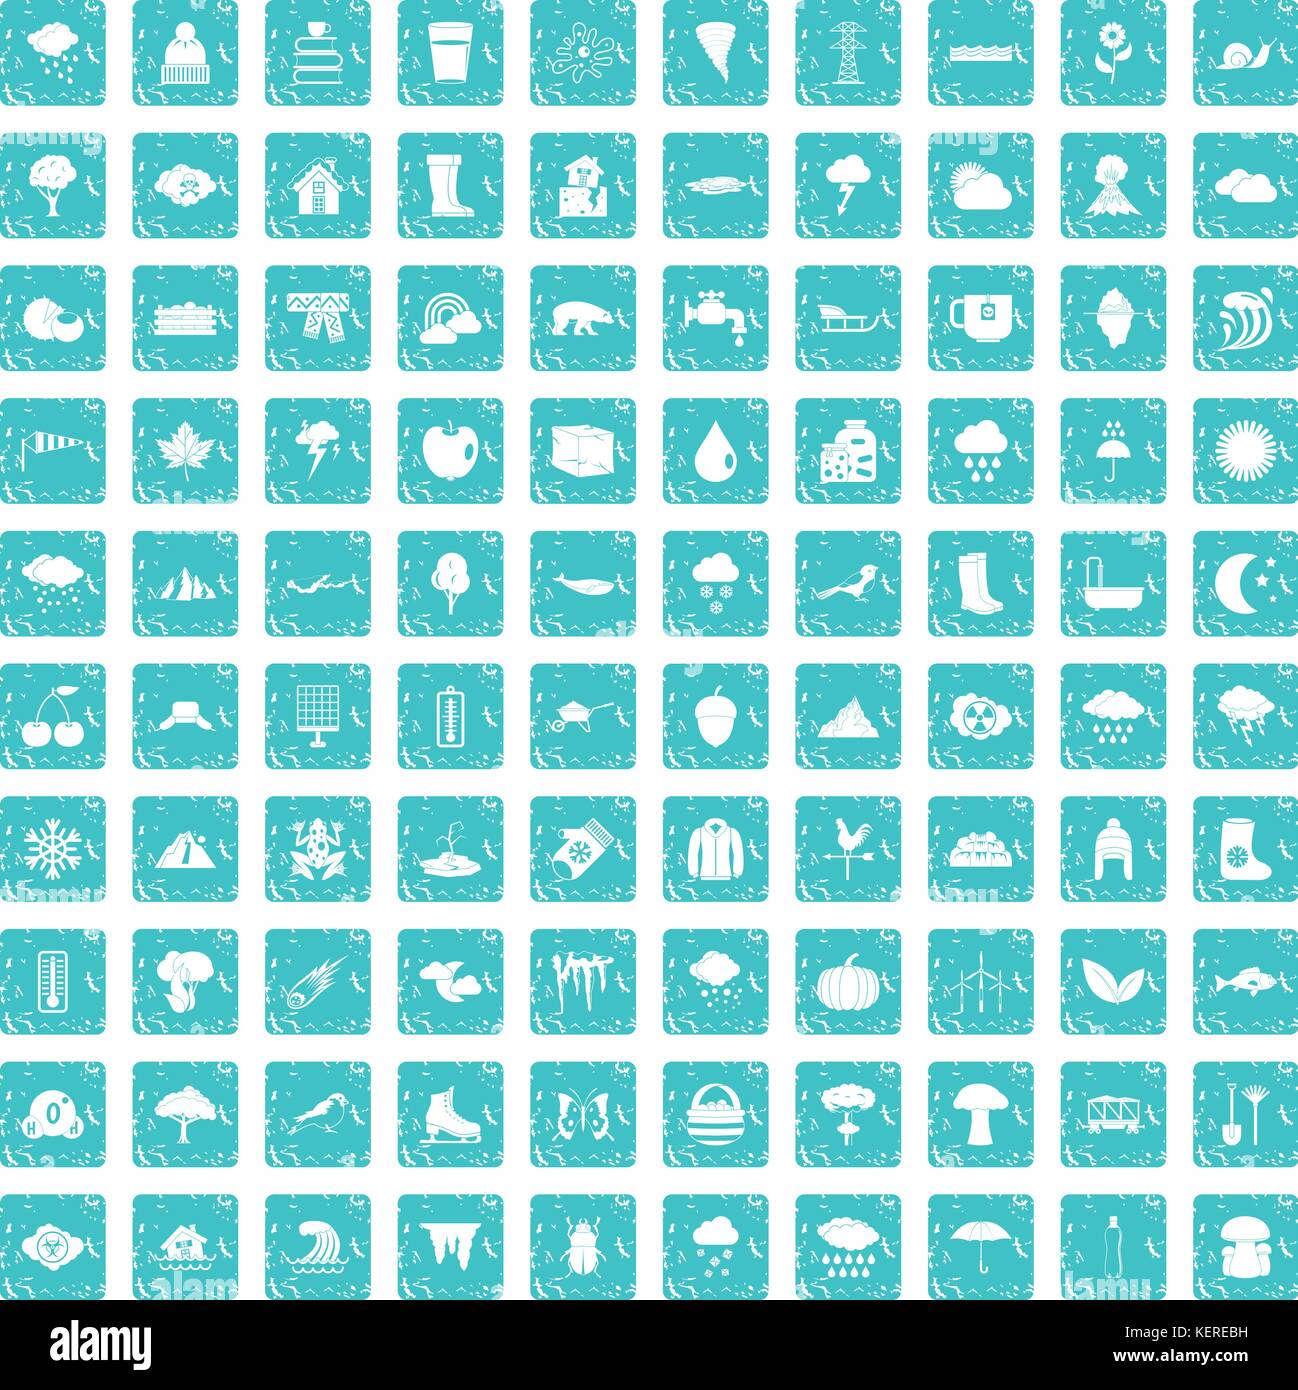 100 clouds icons set grunge blue Stock Vector